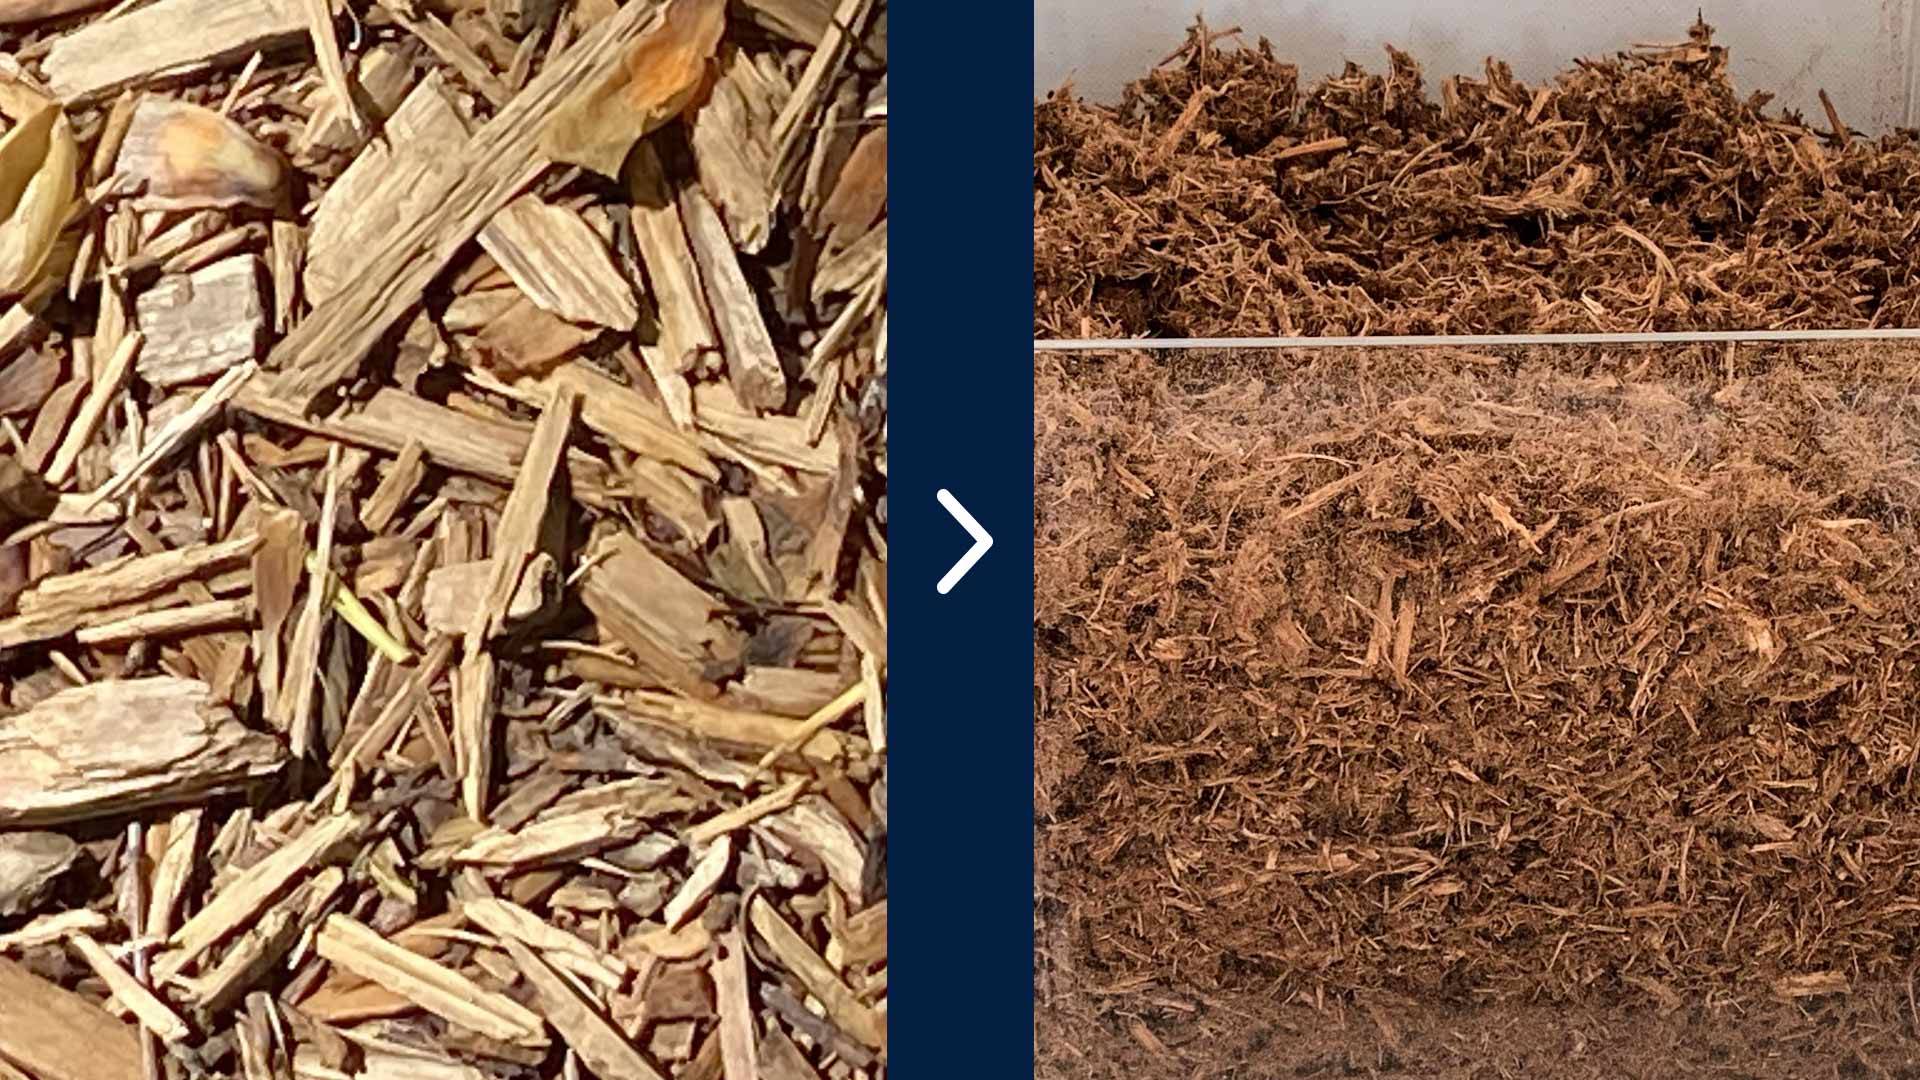 The outcome of the processing of forest residue using the wood fiber machine.